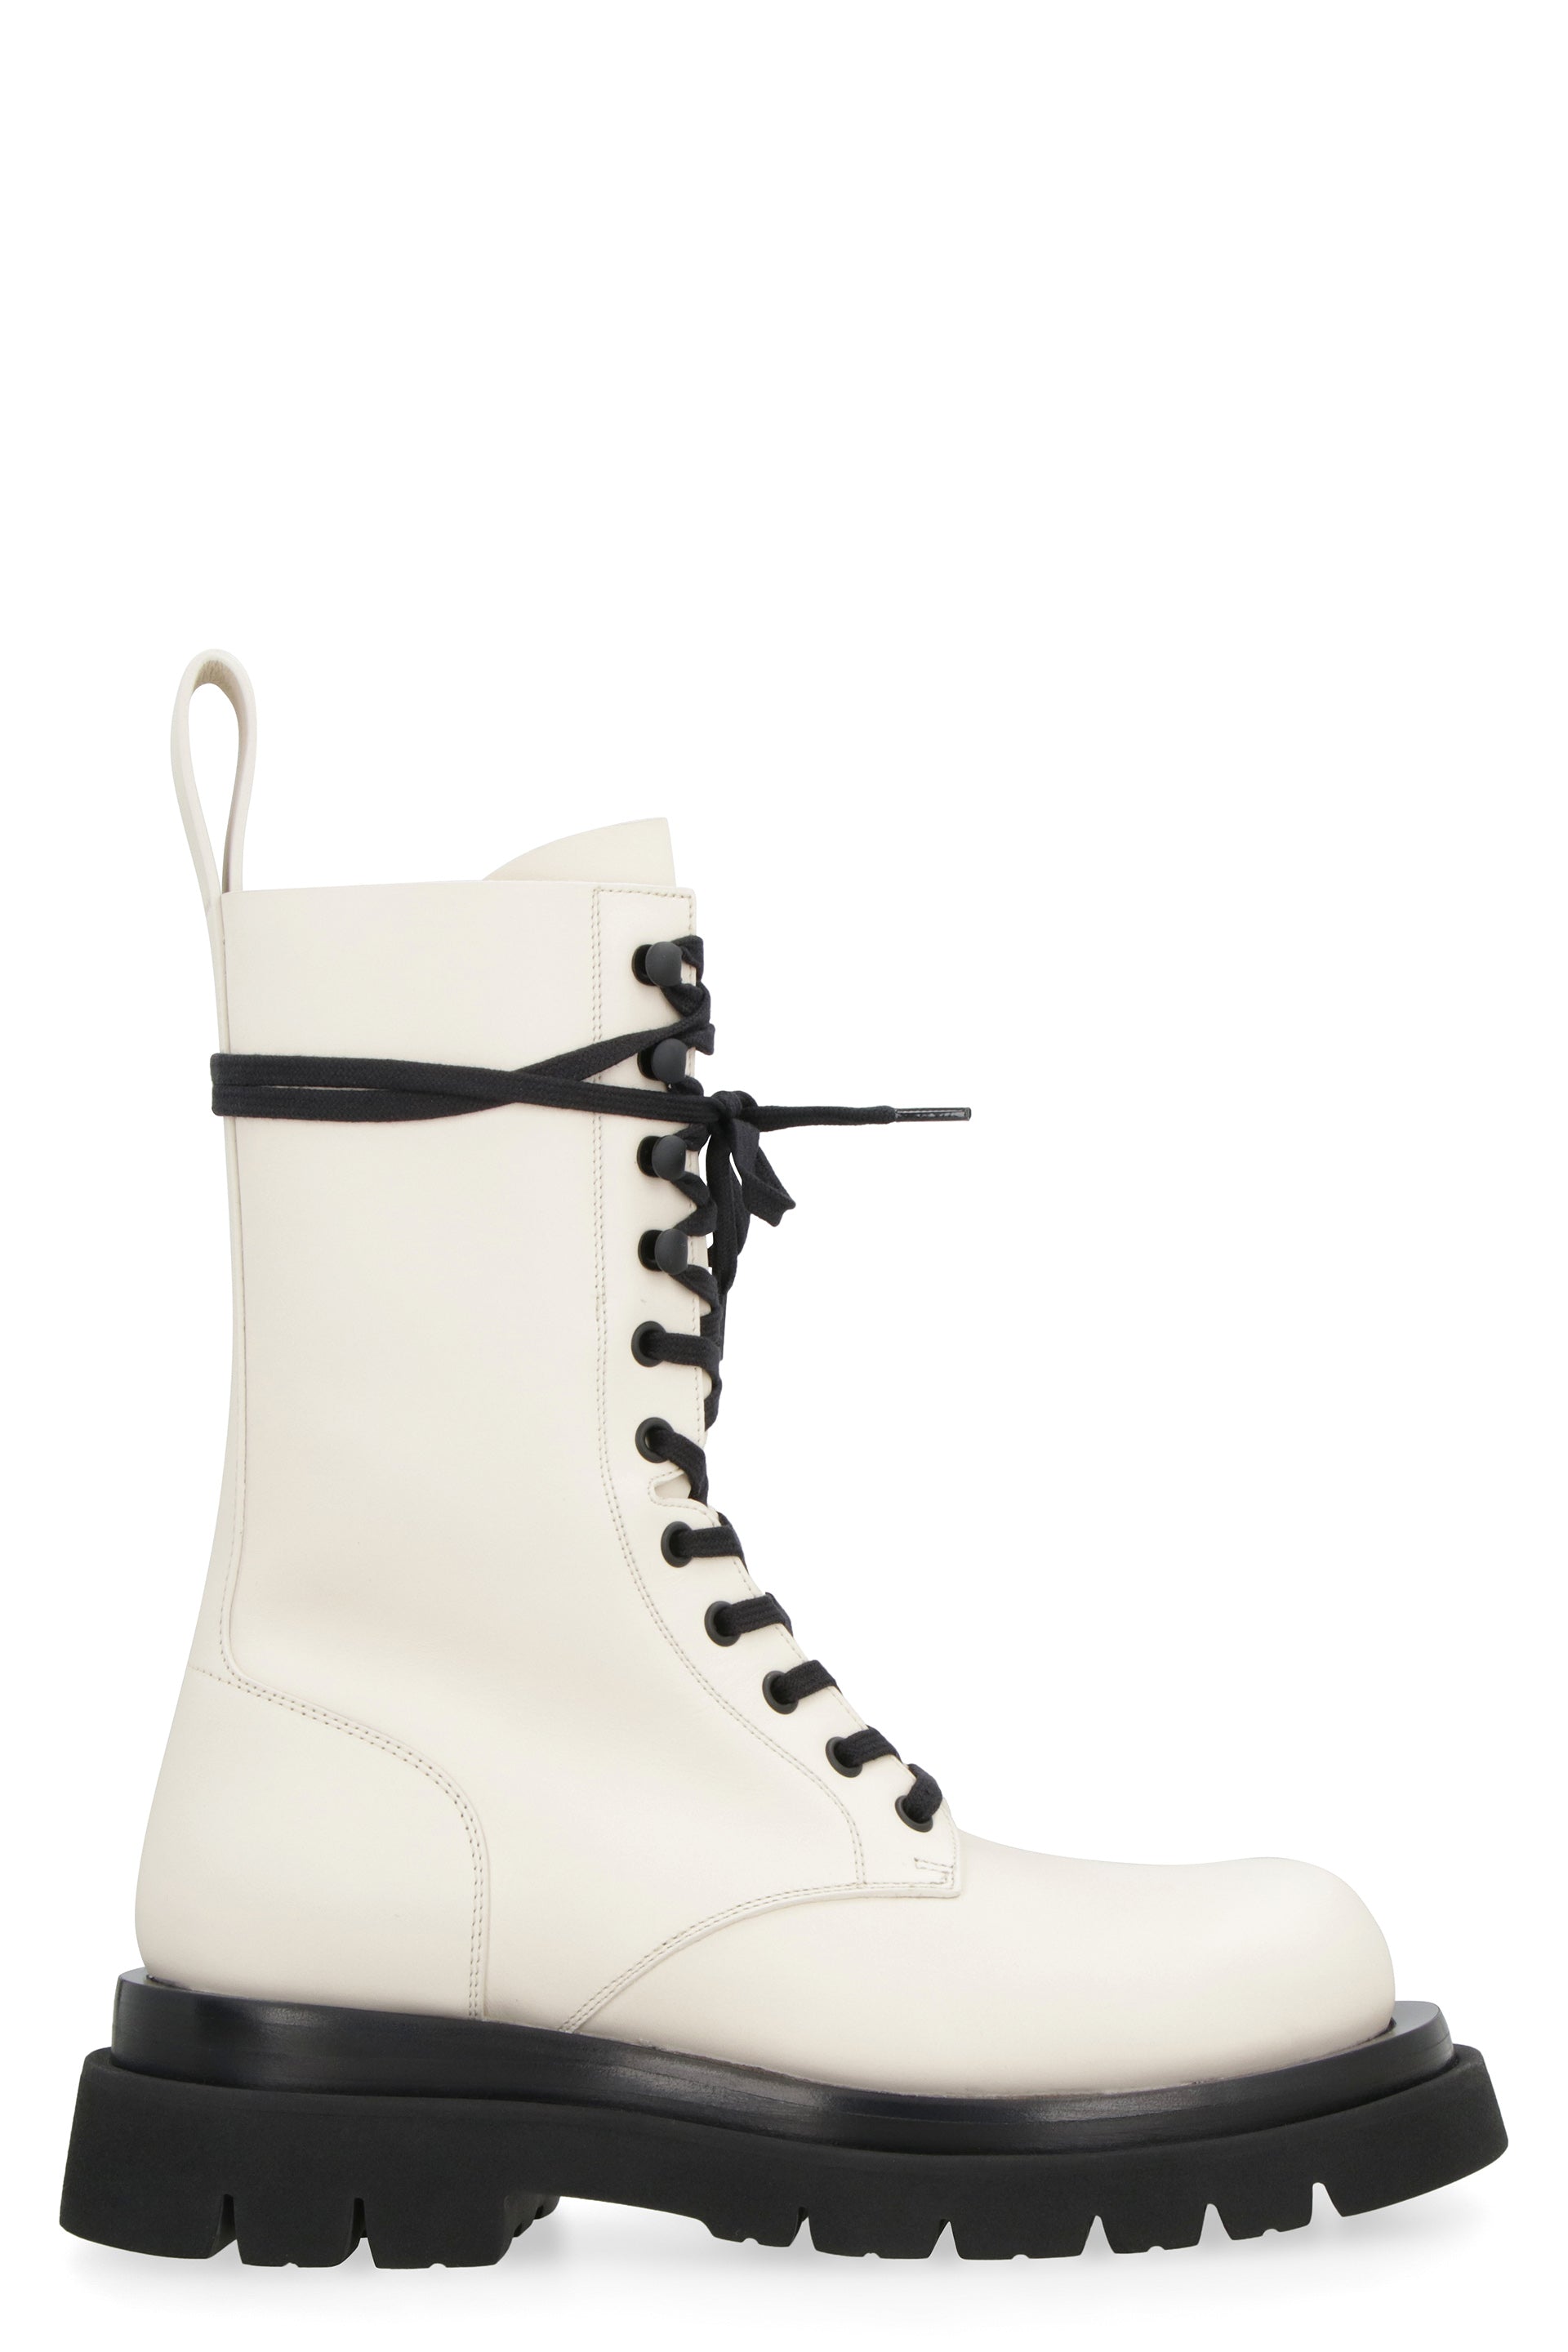 Bottega Veneta Lace-up Ankle Boots For Women In Panna